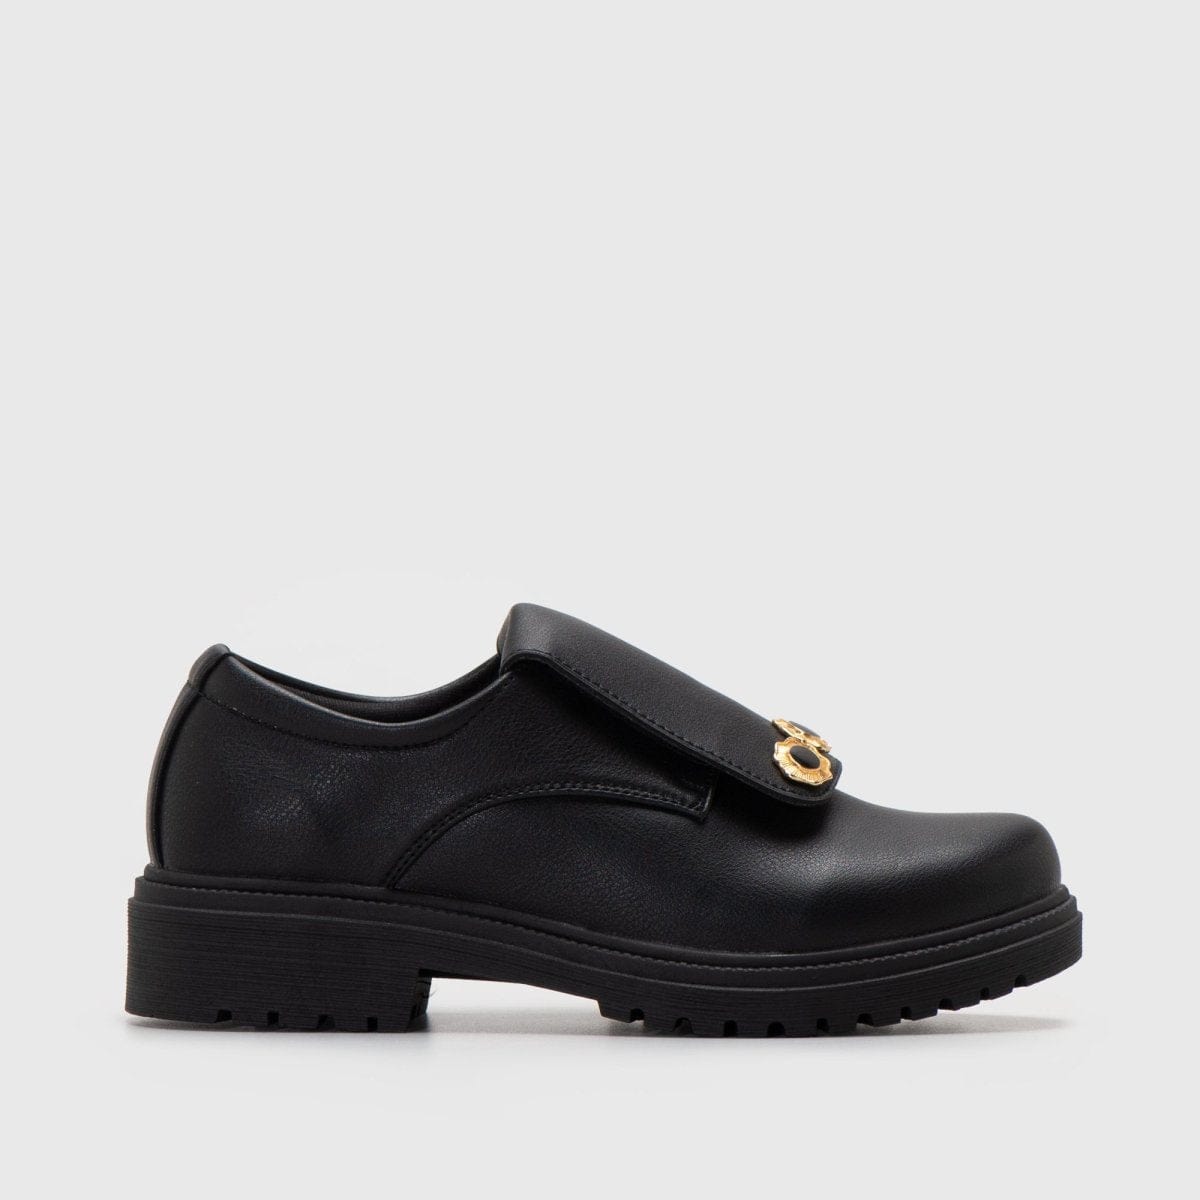 Adorable Projects Official Oxford Gluvi Oxford Black